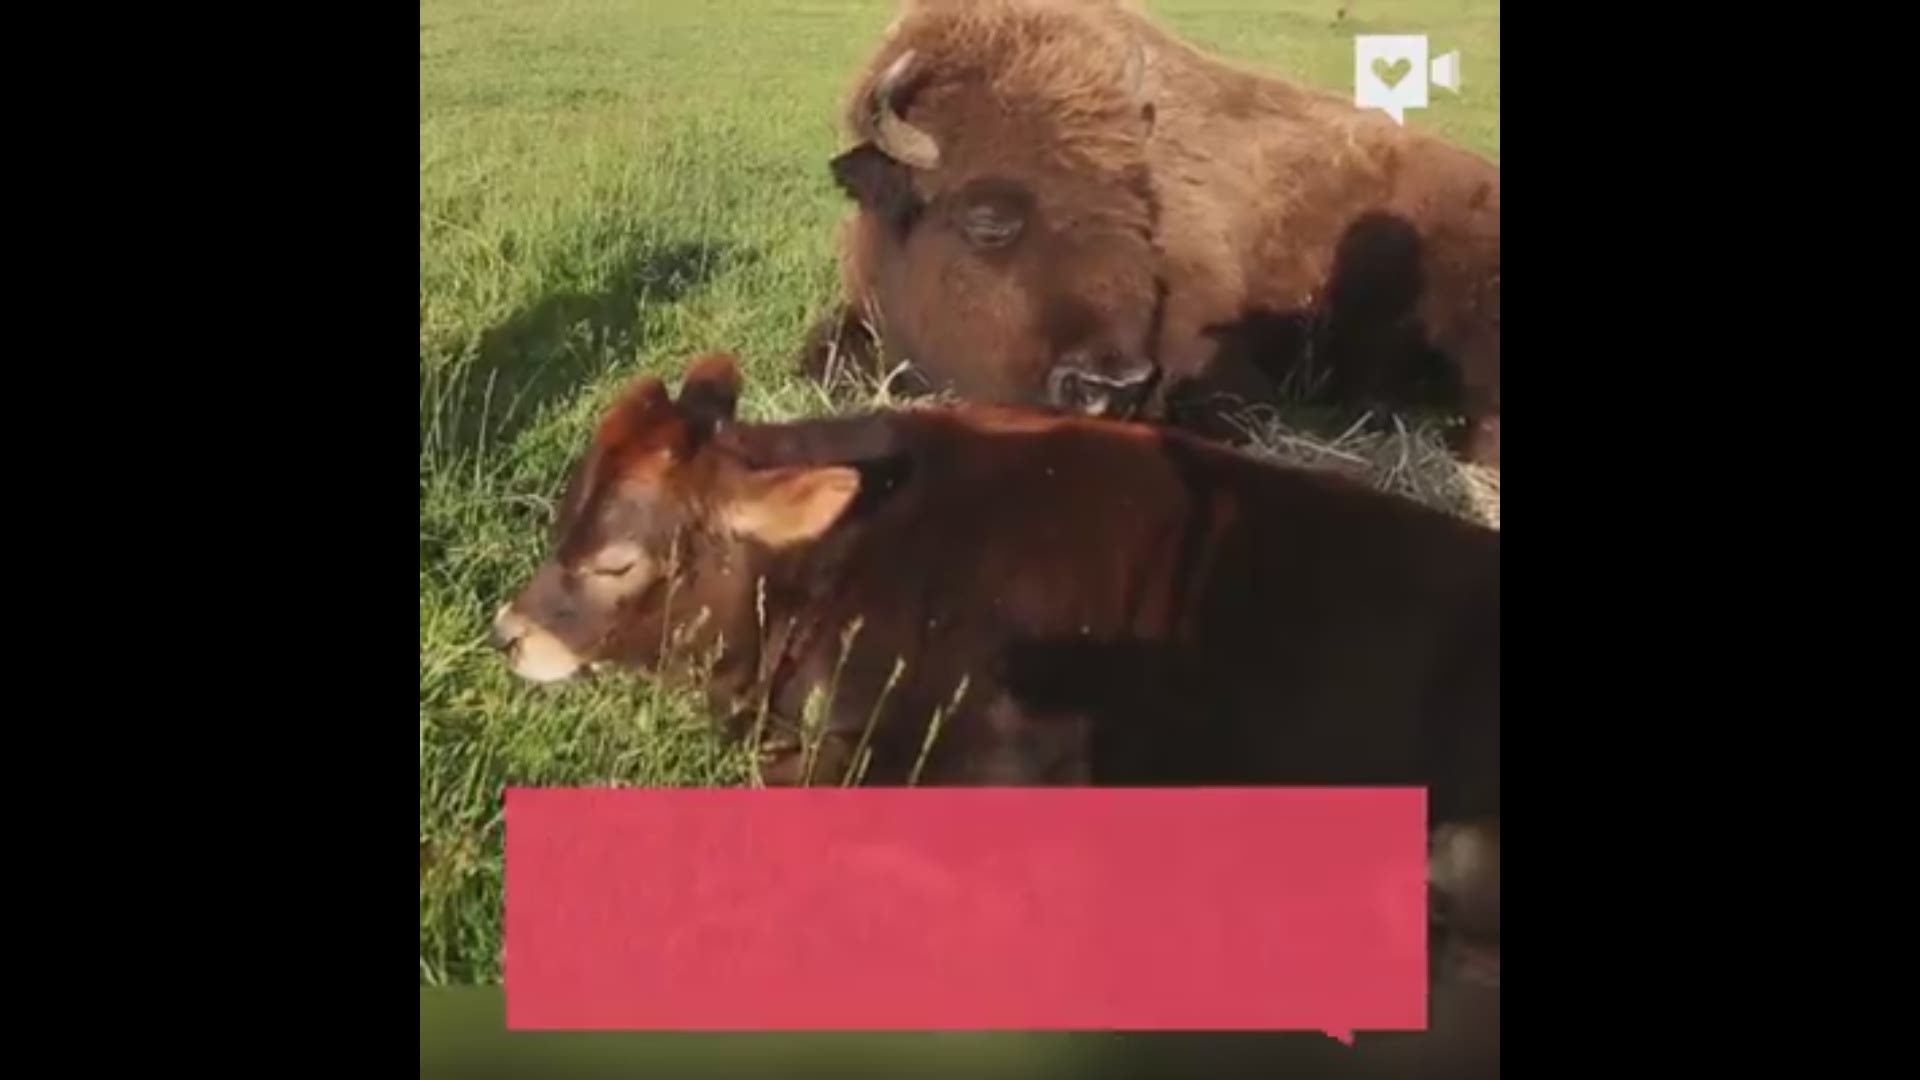 Helen, a blind bison, hadn't made any animal friends in the nearly three years she has lived at an animal sanctuary in Oregon. That is until she met Oliver, a calf born in February. Humankind